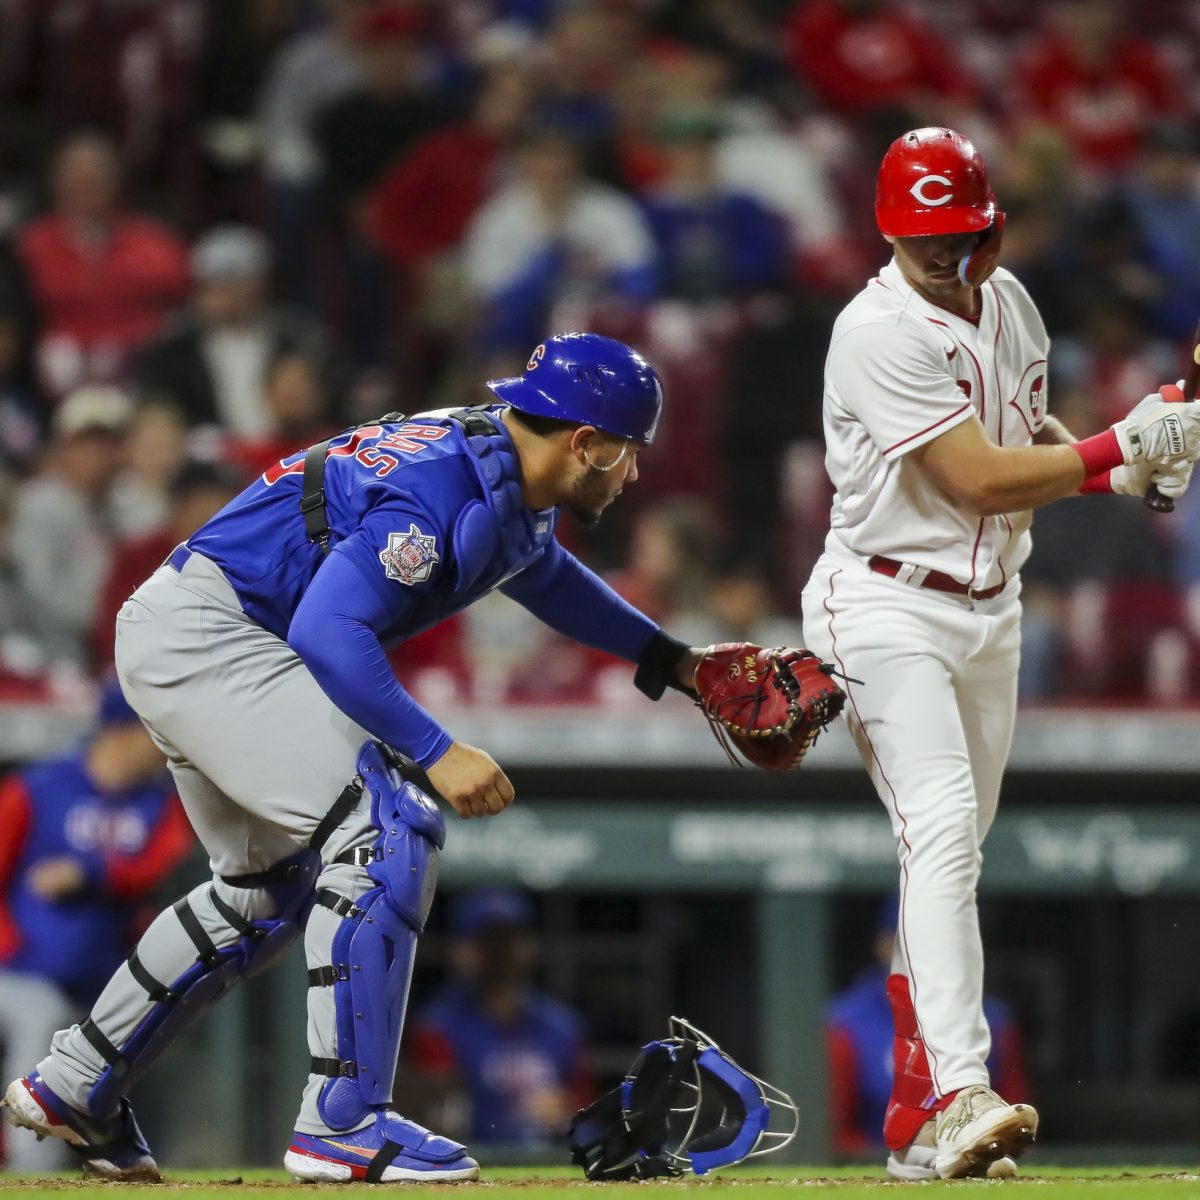 Chicago Cubs vs. Cincinnati Reds Prediction, Preview, and Odds - 10-5-2022